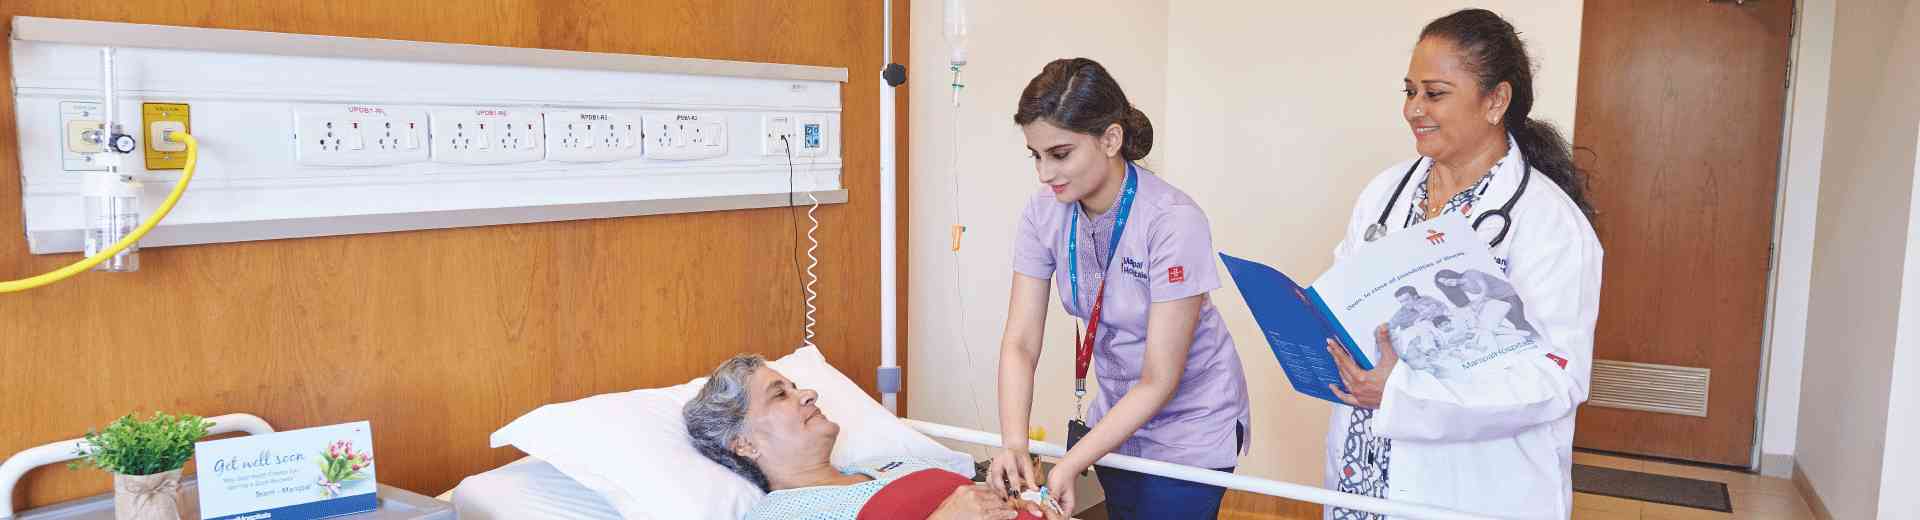 Outpatient and In-patient services in Delhi